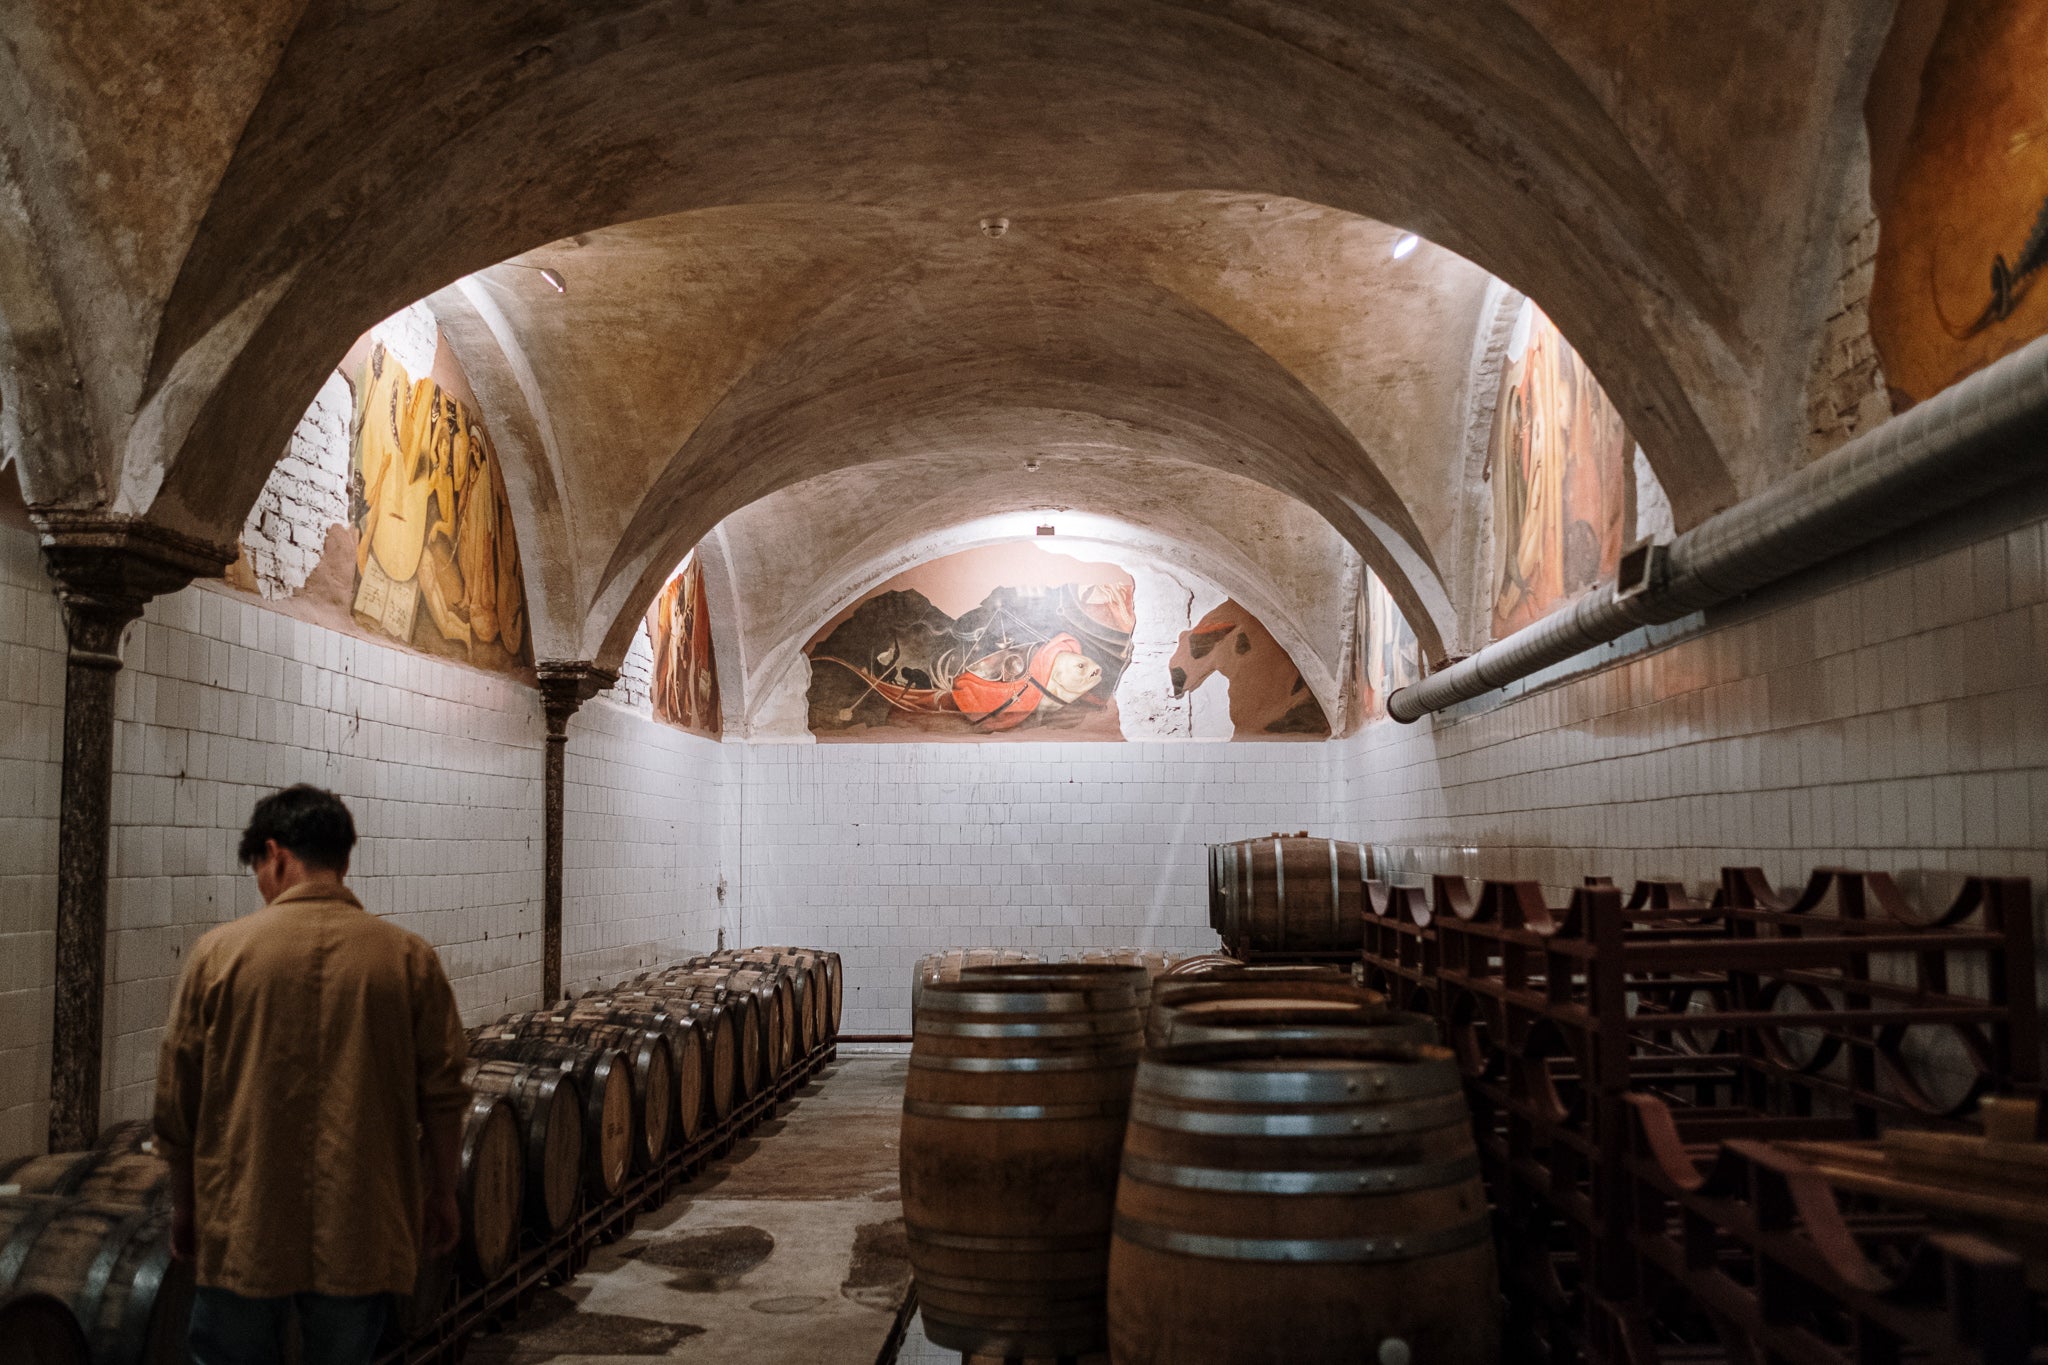 Sherry barrels in a cellar in Spain with a worked to the left side